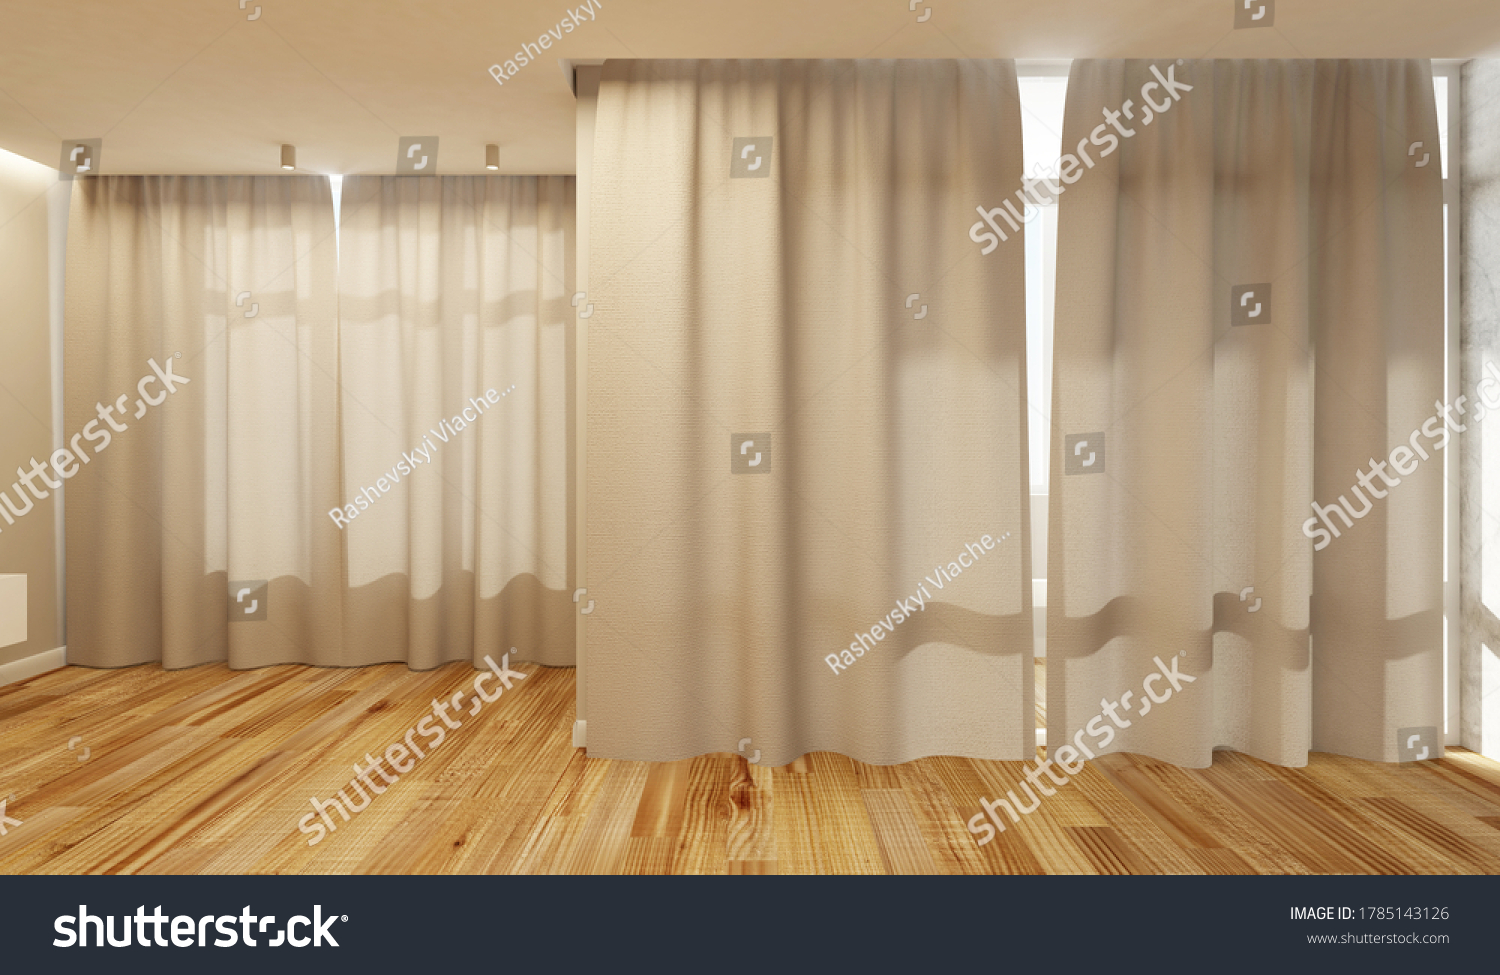 Empty Living Room Interior in Light Tones with closed Curtains. 3D Rendering #1785143126